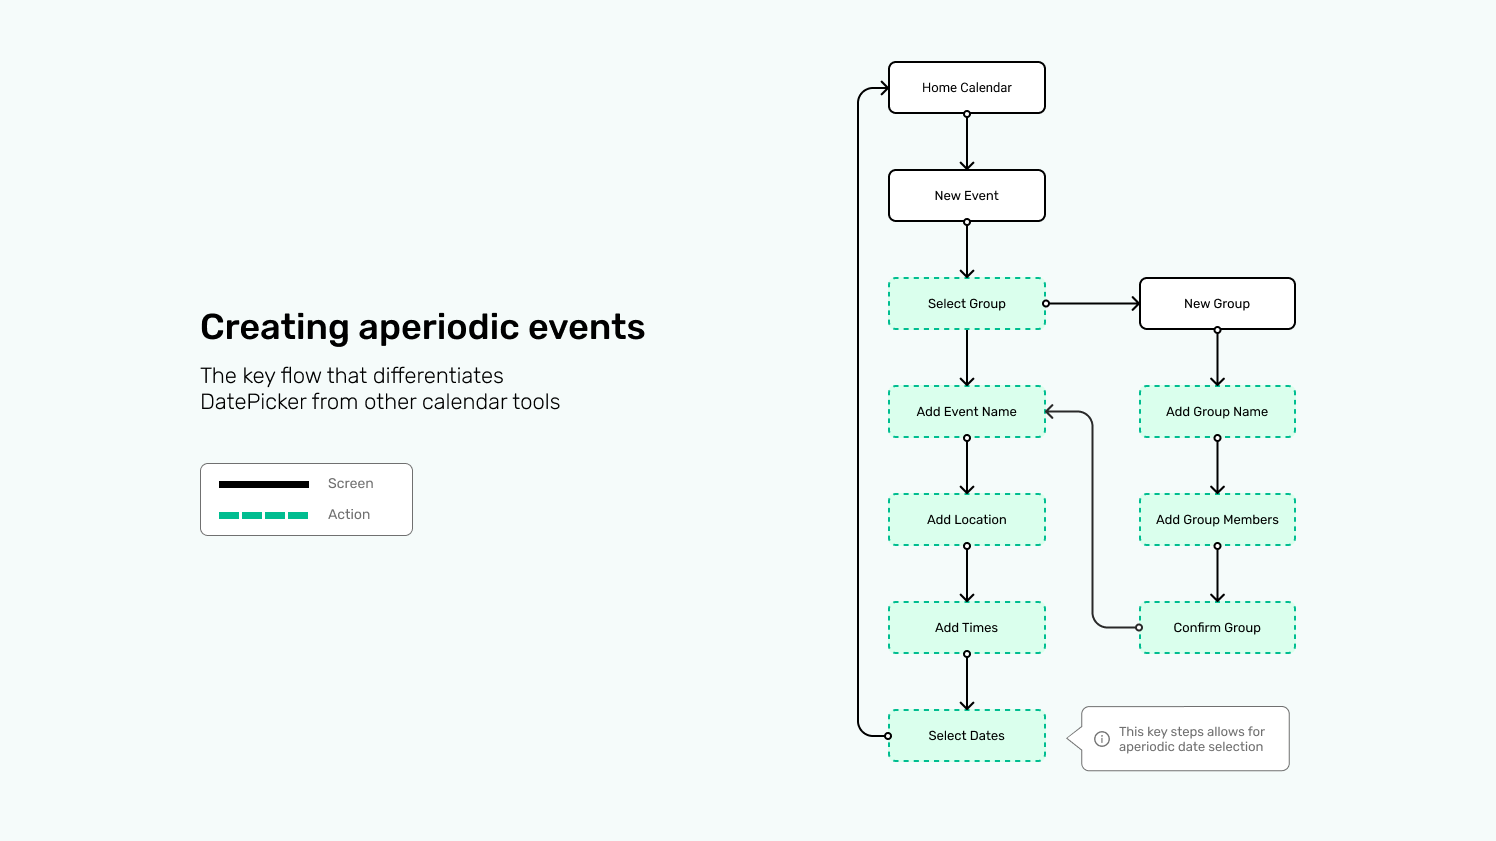 The DatePicker workflow for creating a new event